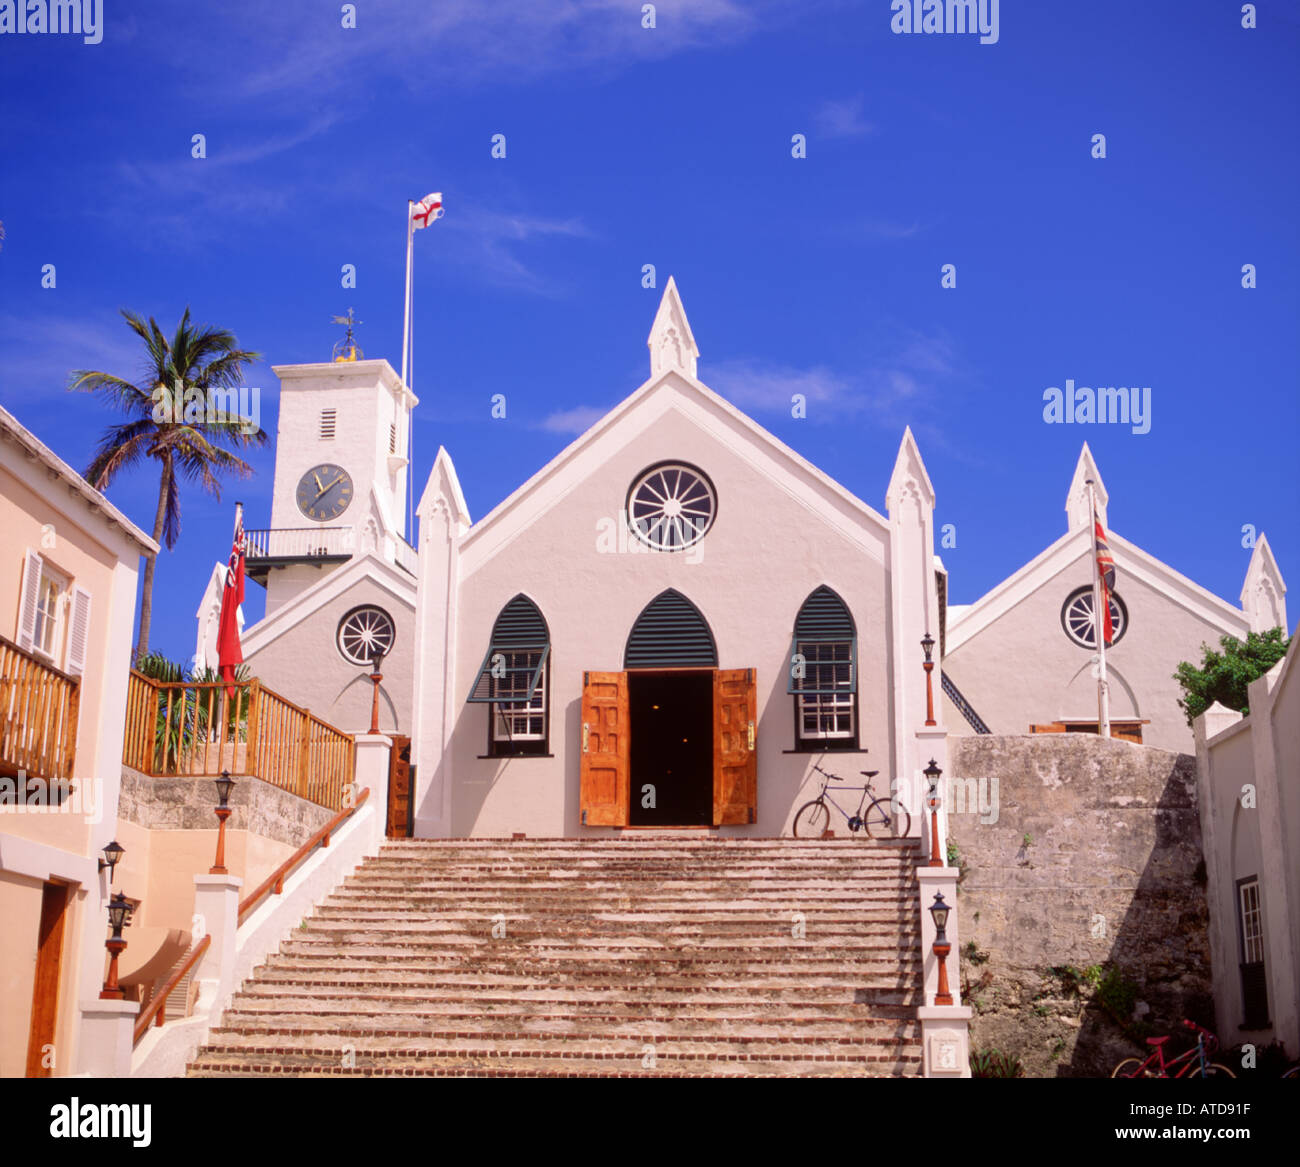 St Peter's Church In St George's is Oldest Church In Bermuda Stock Photo